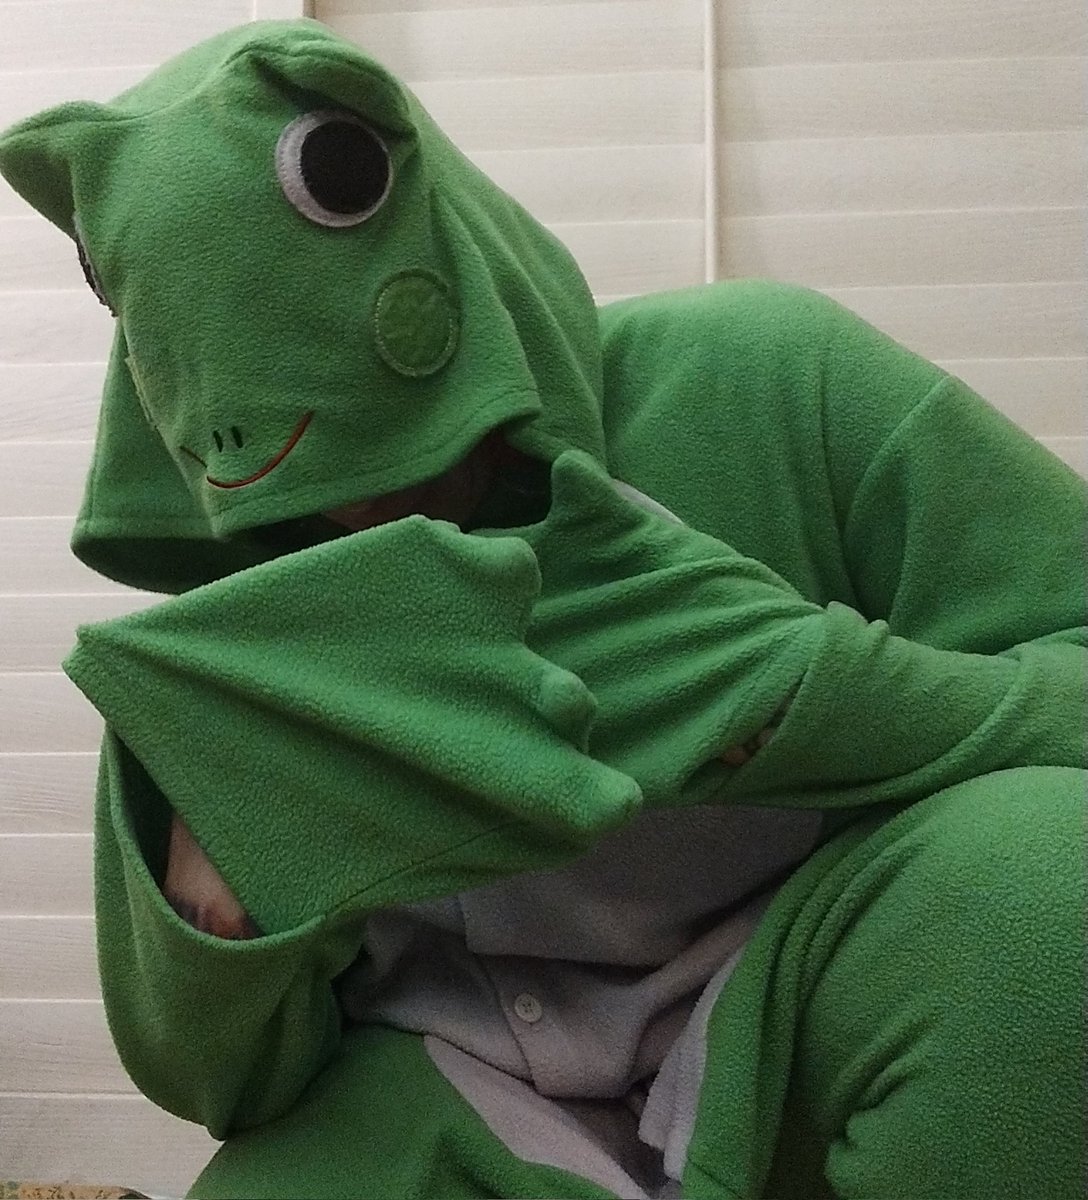 Living in #LosAngeles is hoping your celebrity friends cancel plans so you can stay home & smoke weed in your fleece frog onsie.

They DID cancel & instead of being cold & standing around at a boring function I've fully embraced Korean delivery & frog suit life.